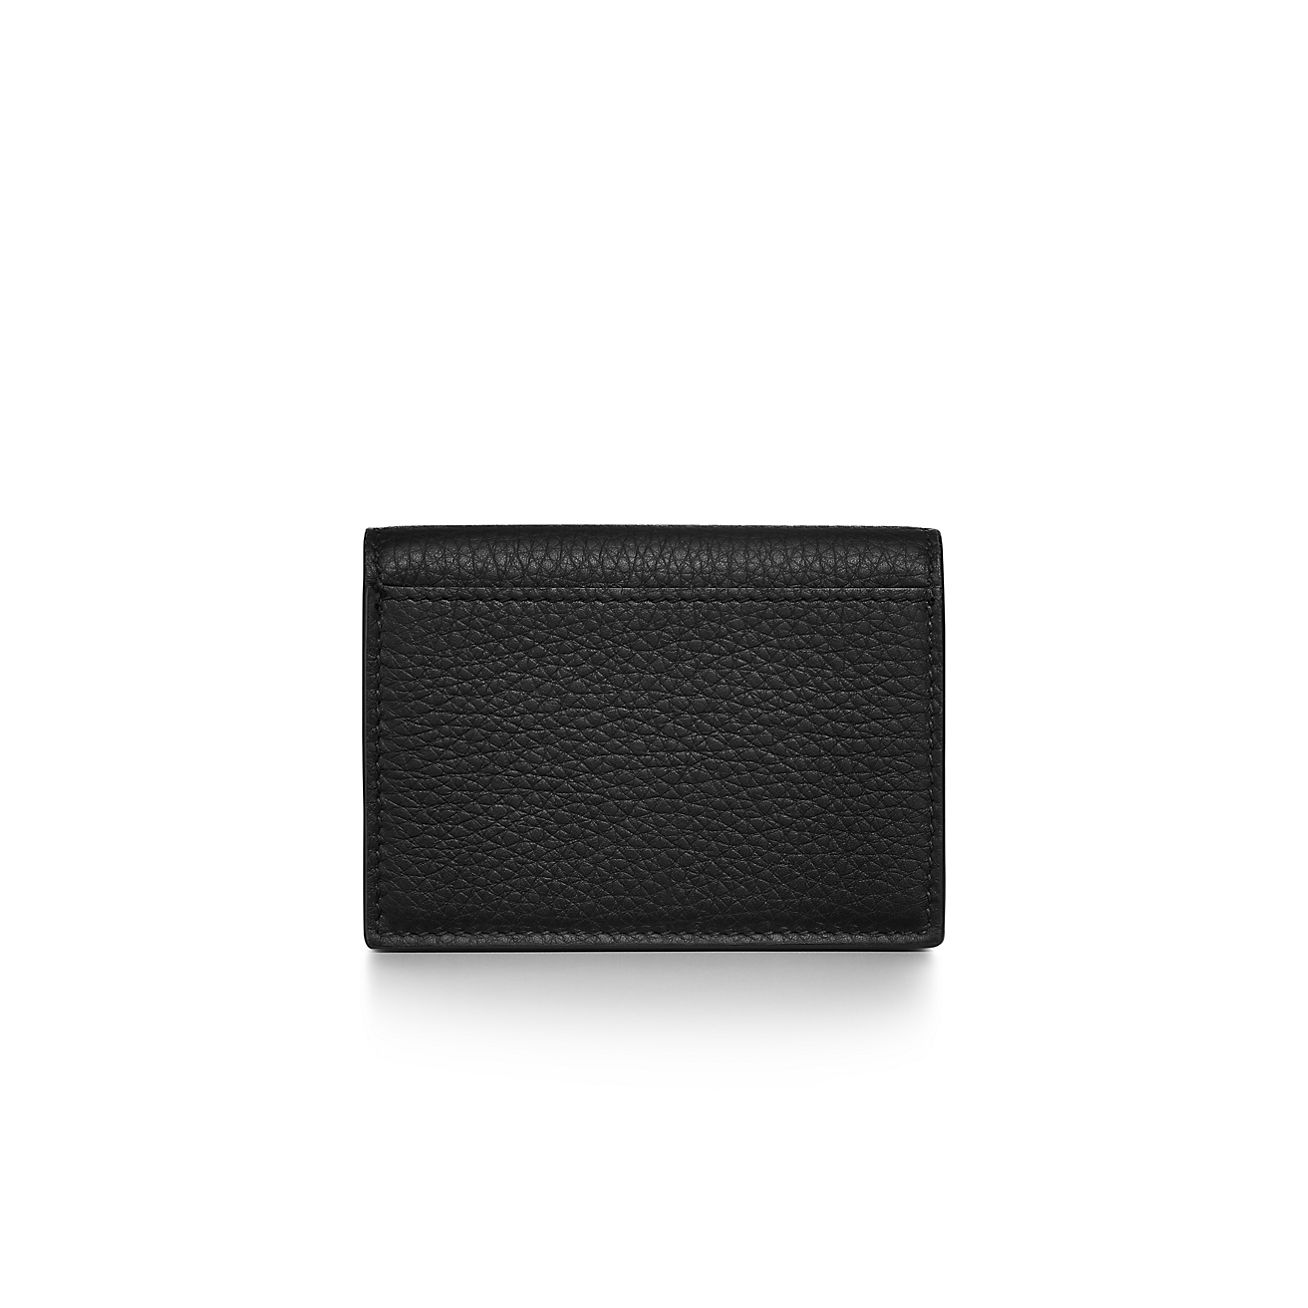 T&CO. Flap Card Holder in Black Leather | Tiffany & Co.